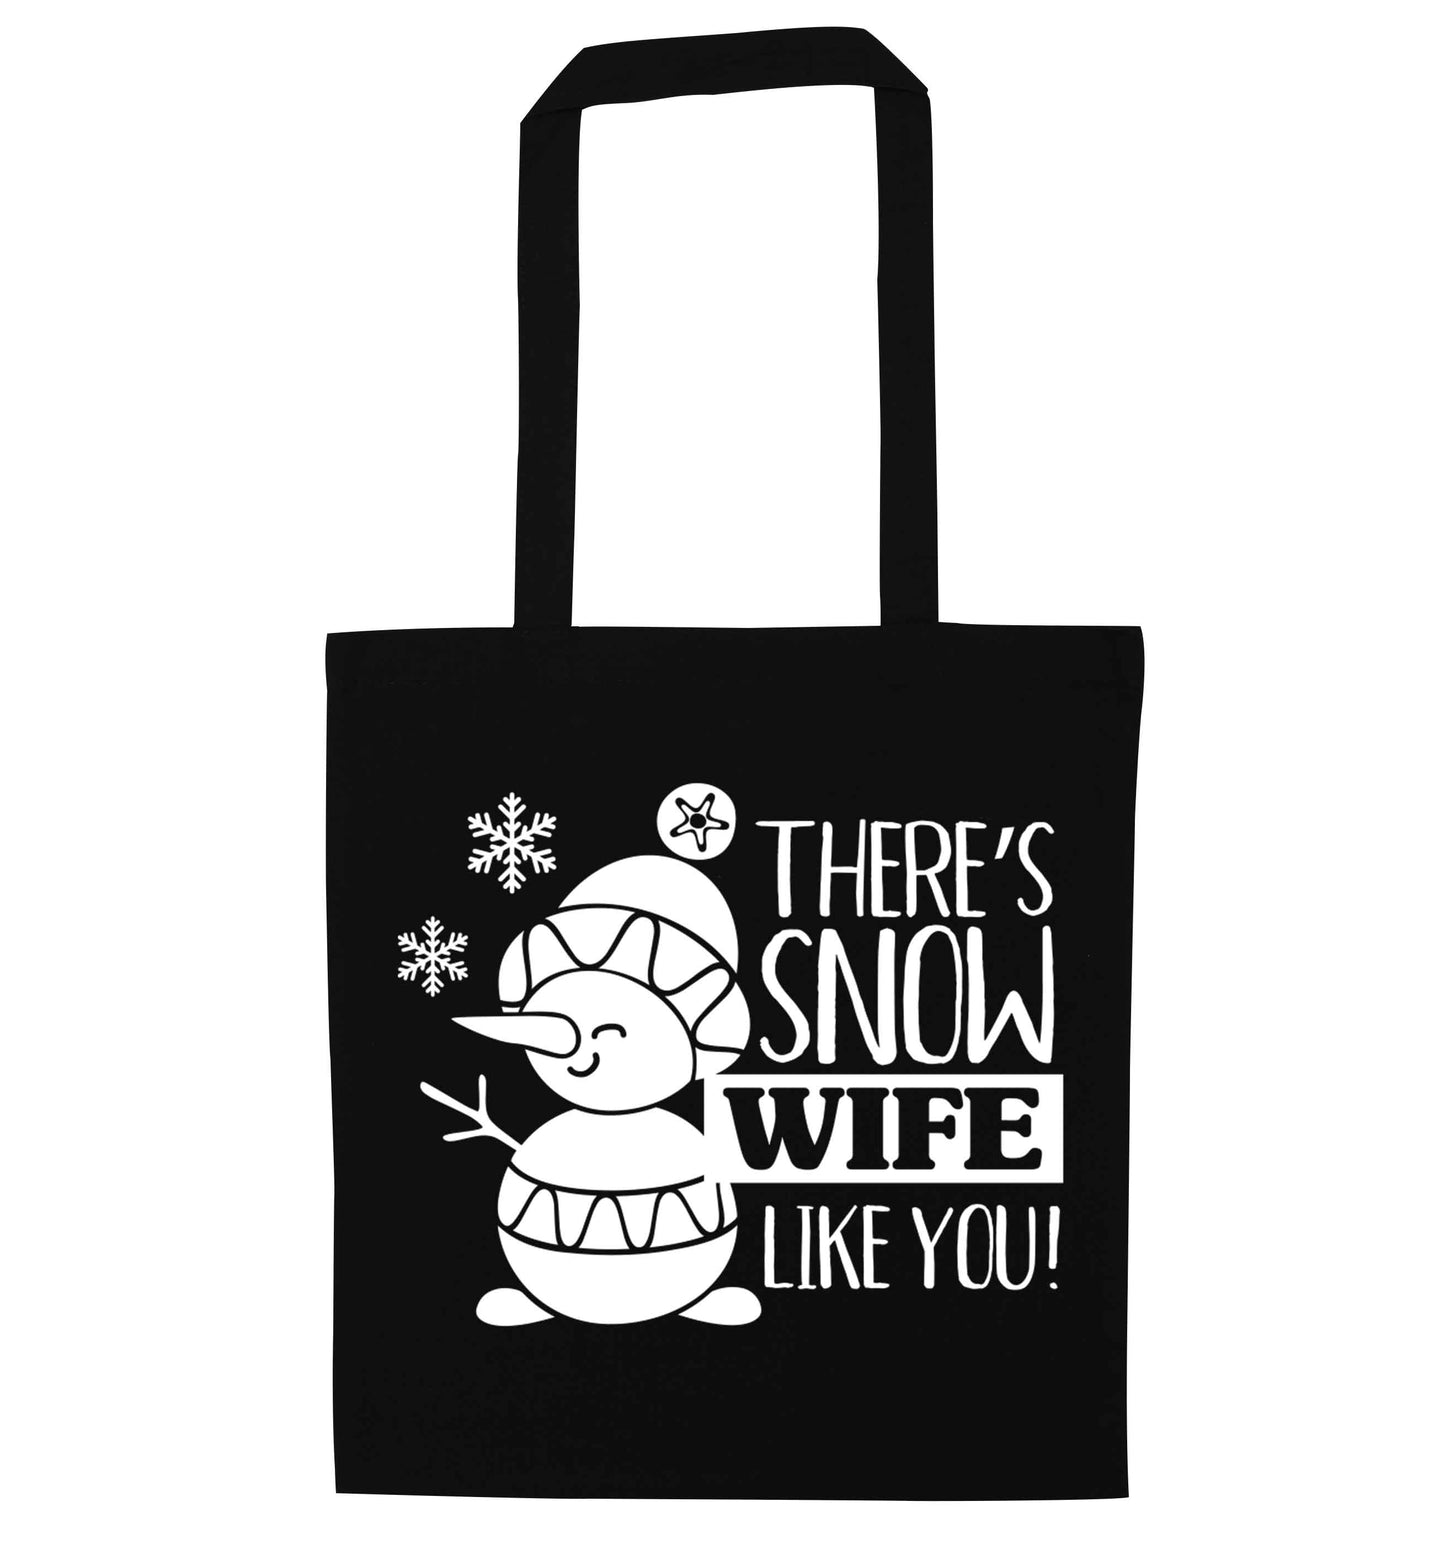 There's snow wife like you black tote bag